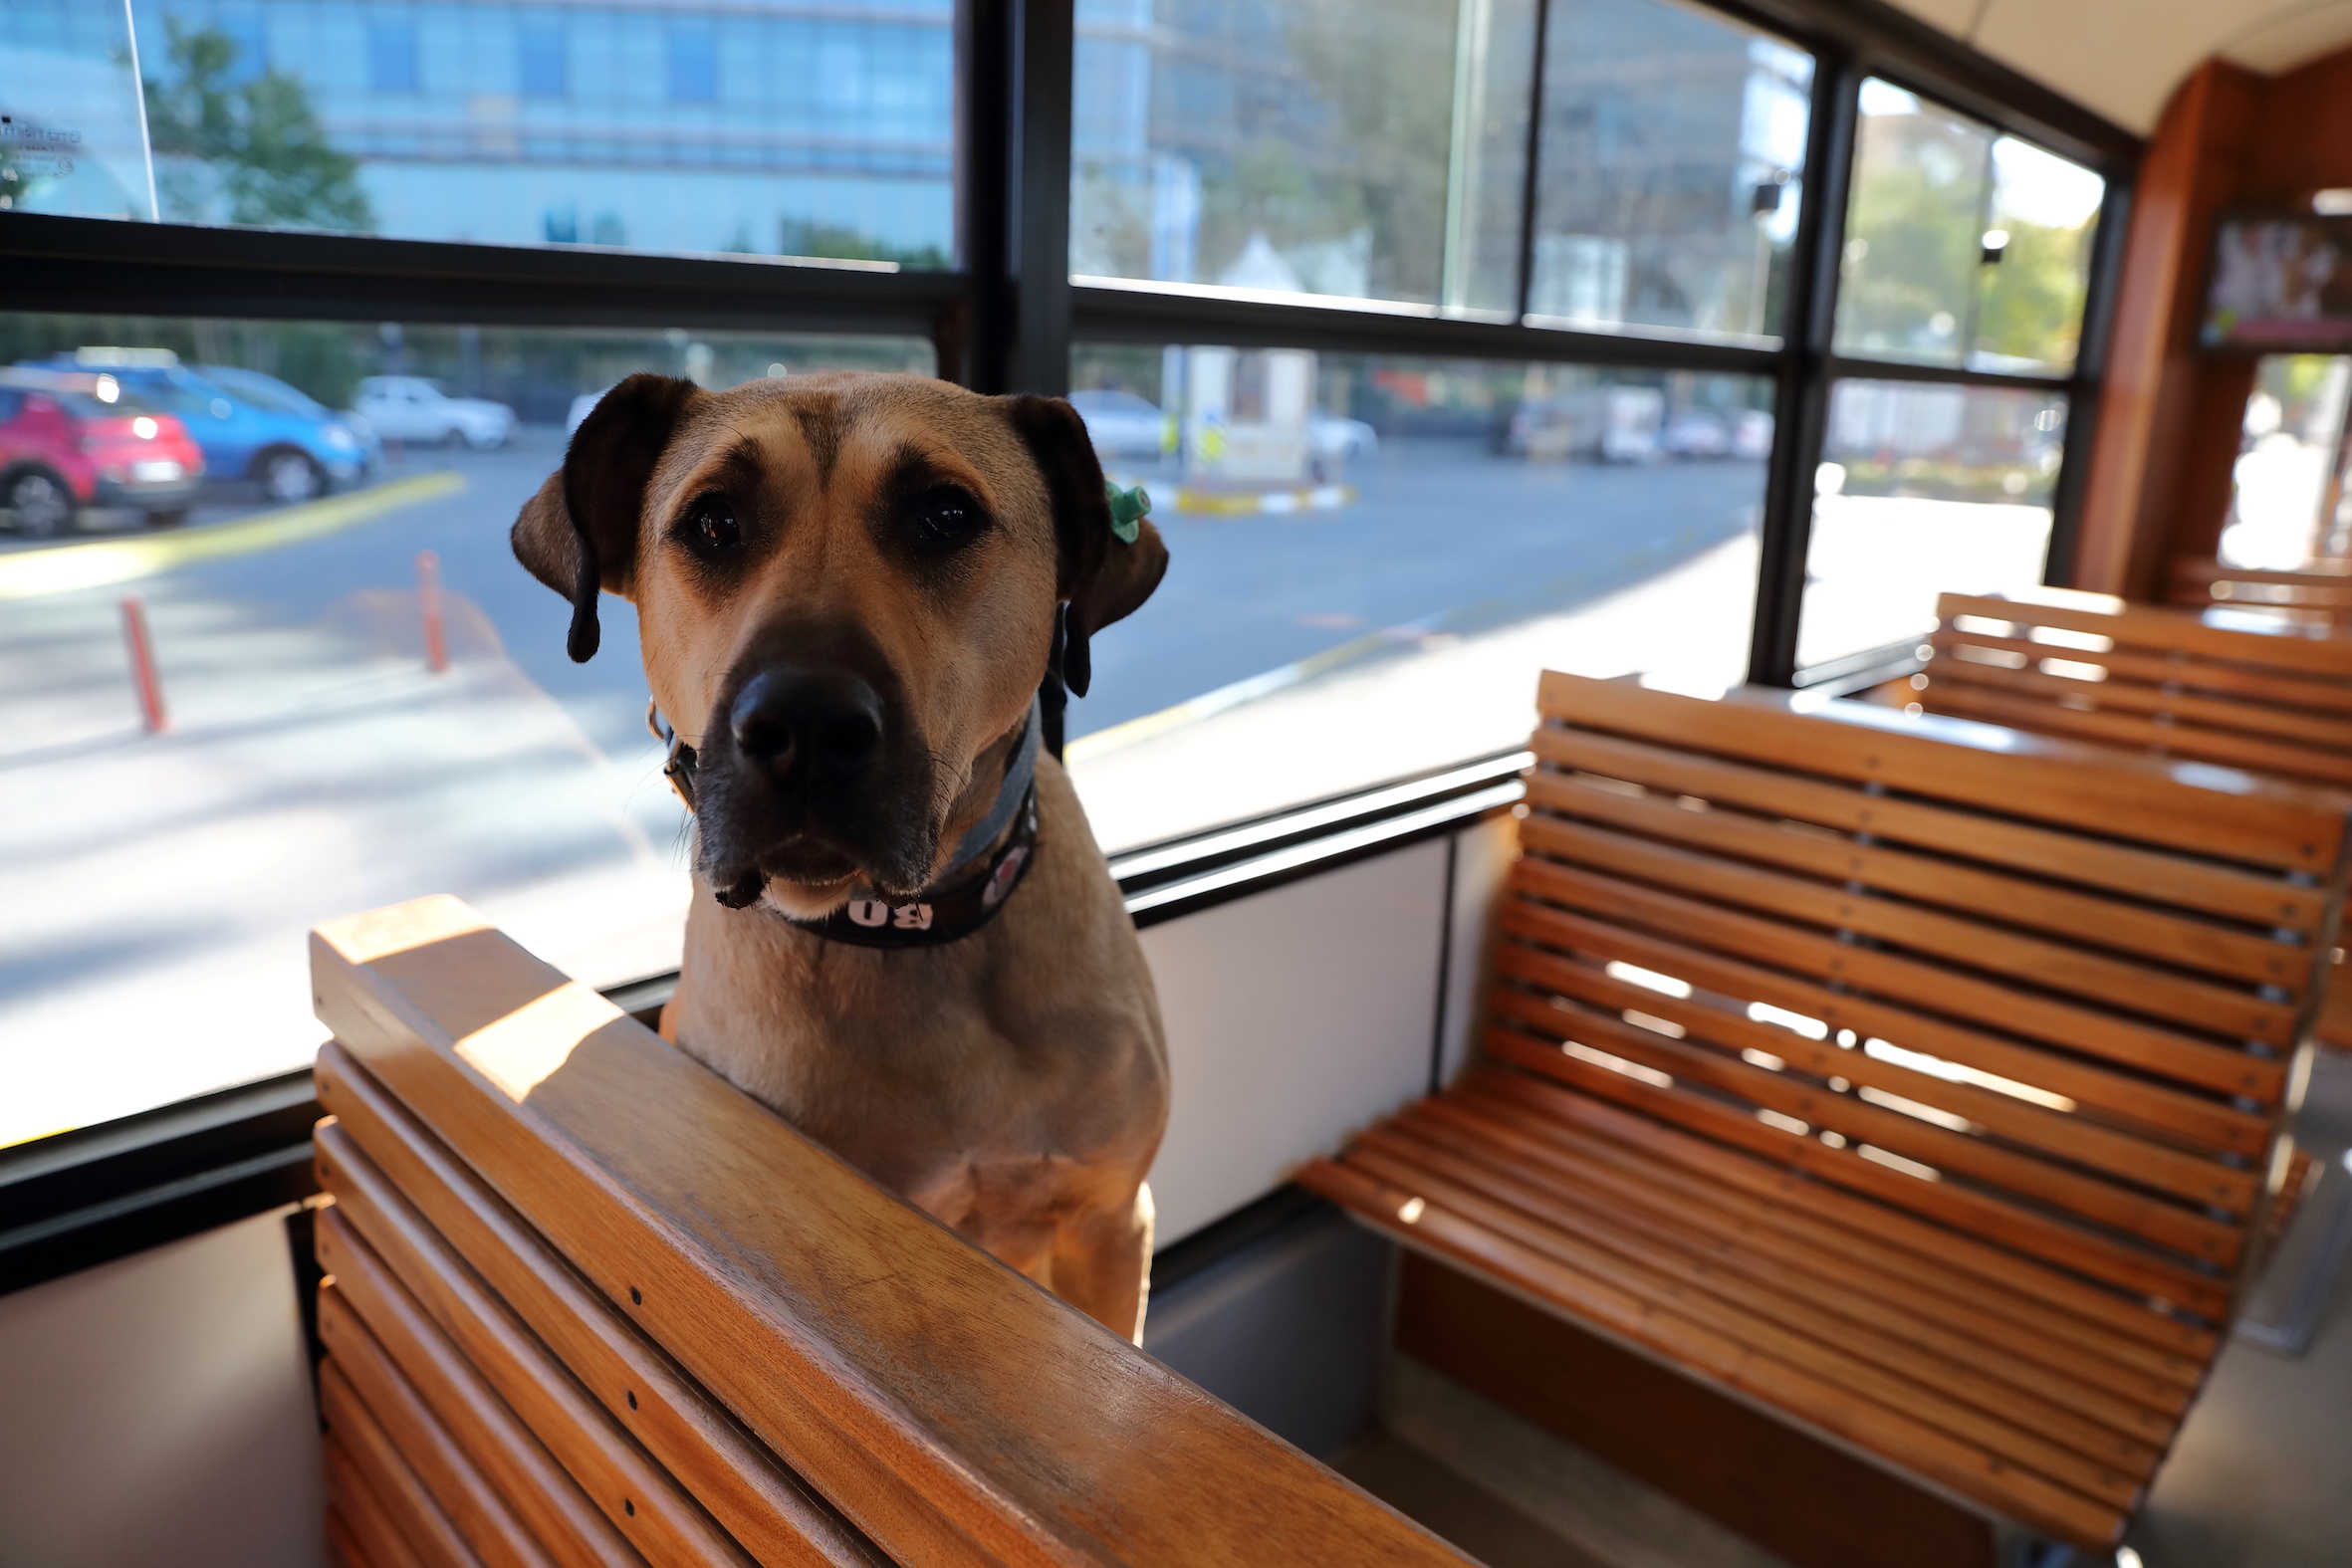 Street dog Boji, a regular user of commuter ferries, buses, metro trains, and trams, sits on a tram in Istanbul's Kadikoy district (Reuters/ Murad Sezer)